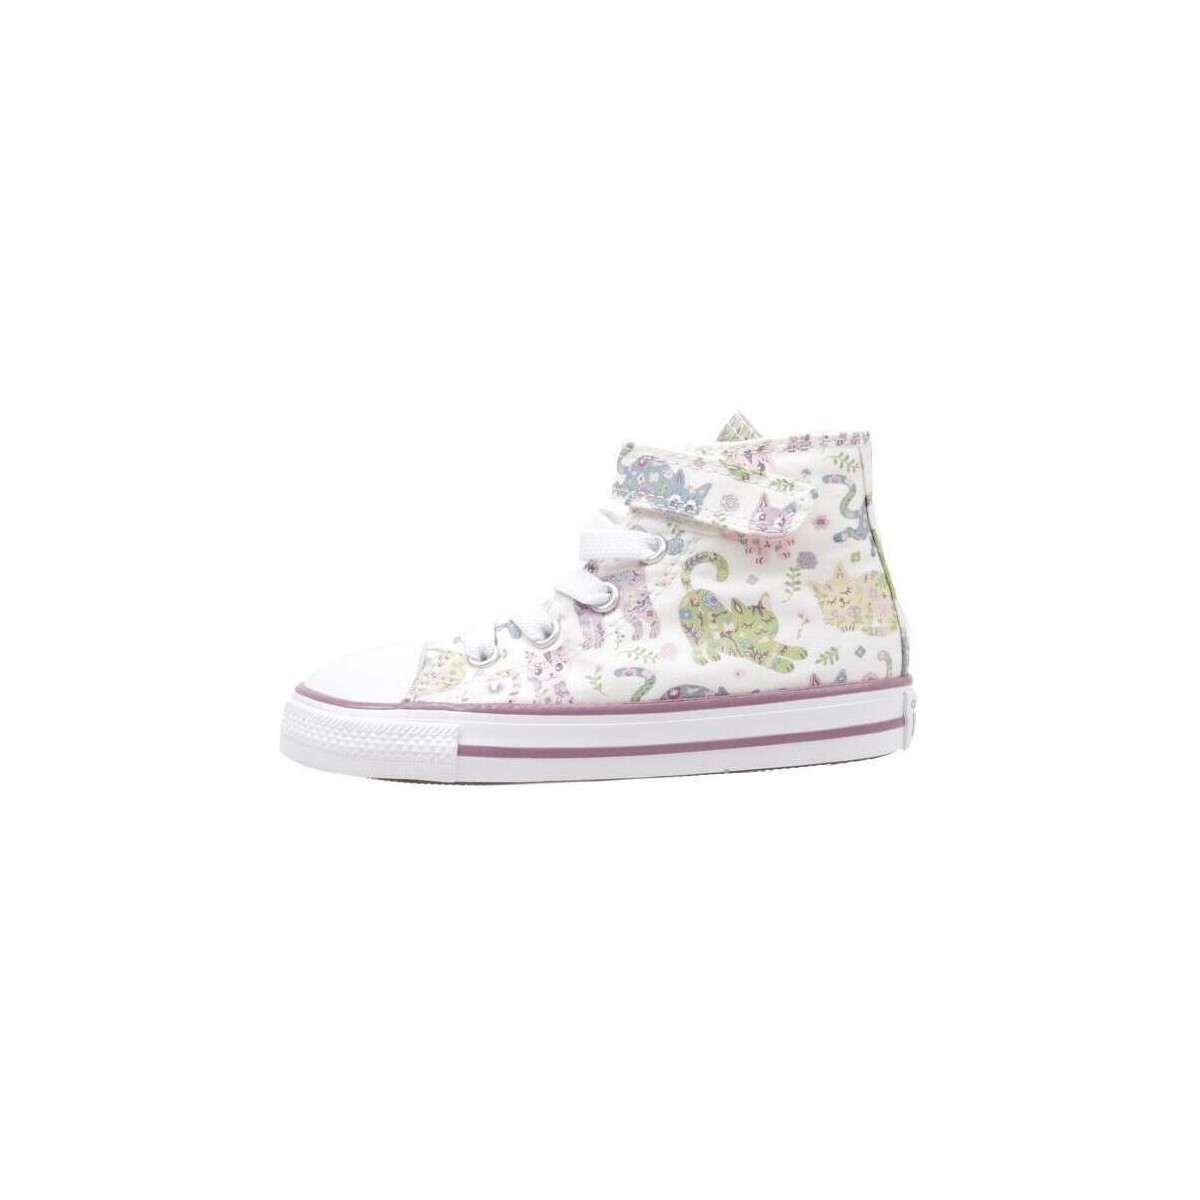 Chaussures Fille Baskets CONVERSE Ctas Lift Hi 572240C Ghost Steel Egret CHUCK TAYLOR ALL STAR EASY-ON FELINE FLORALS Rose